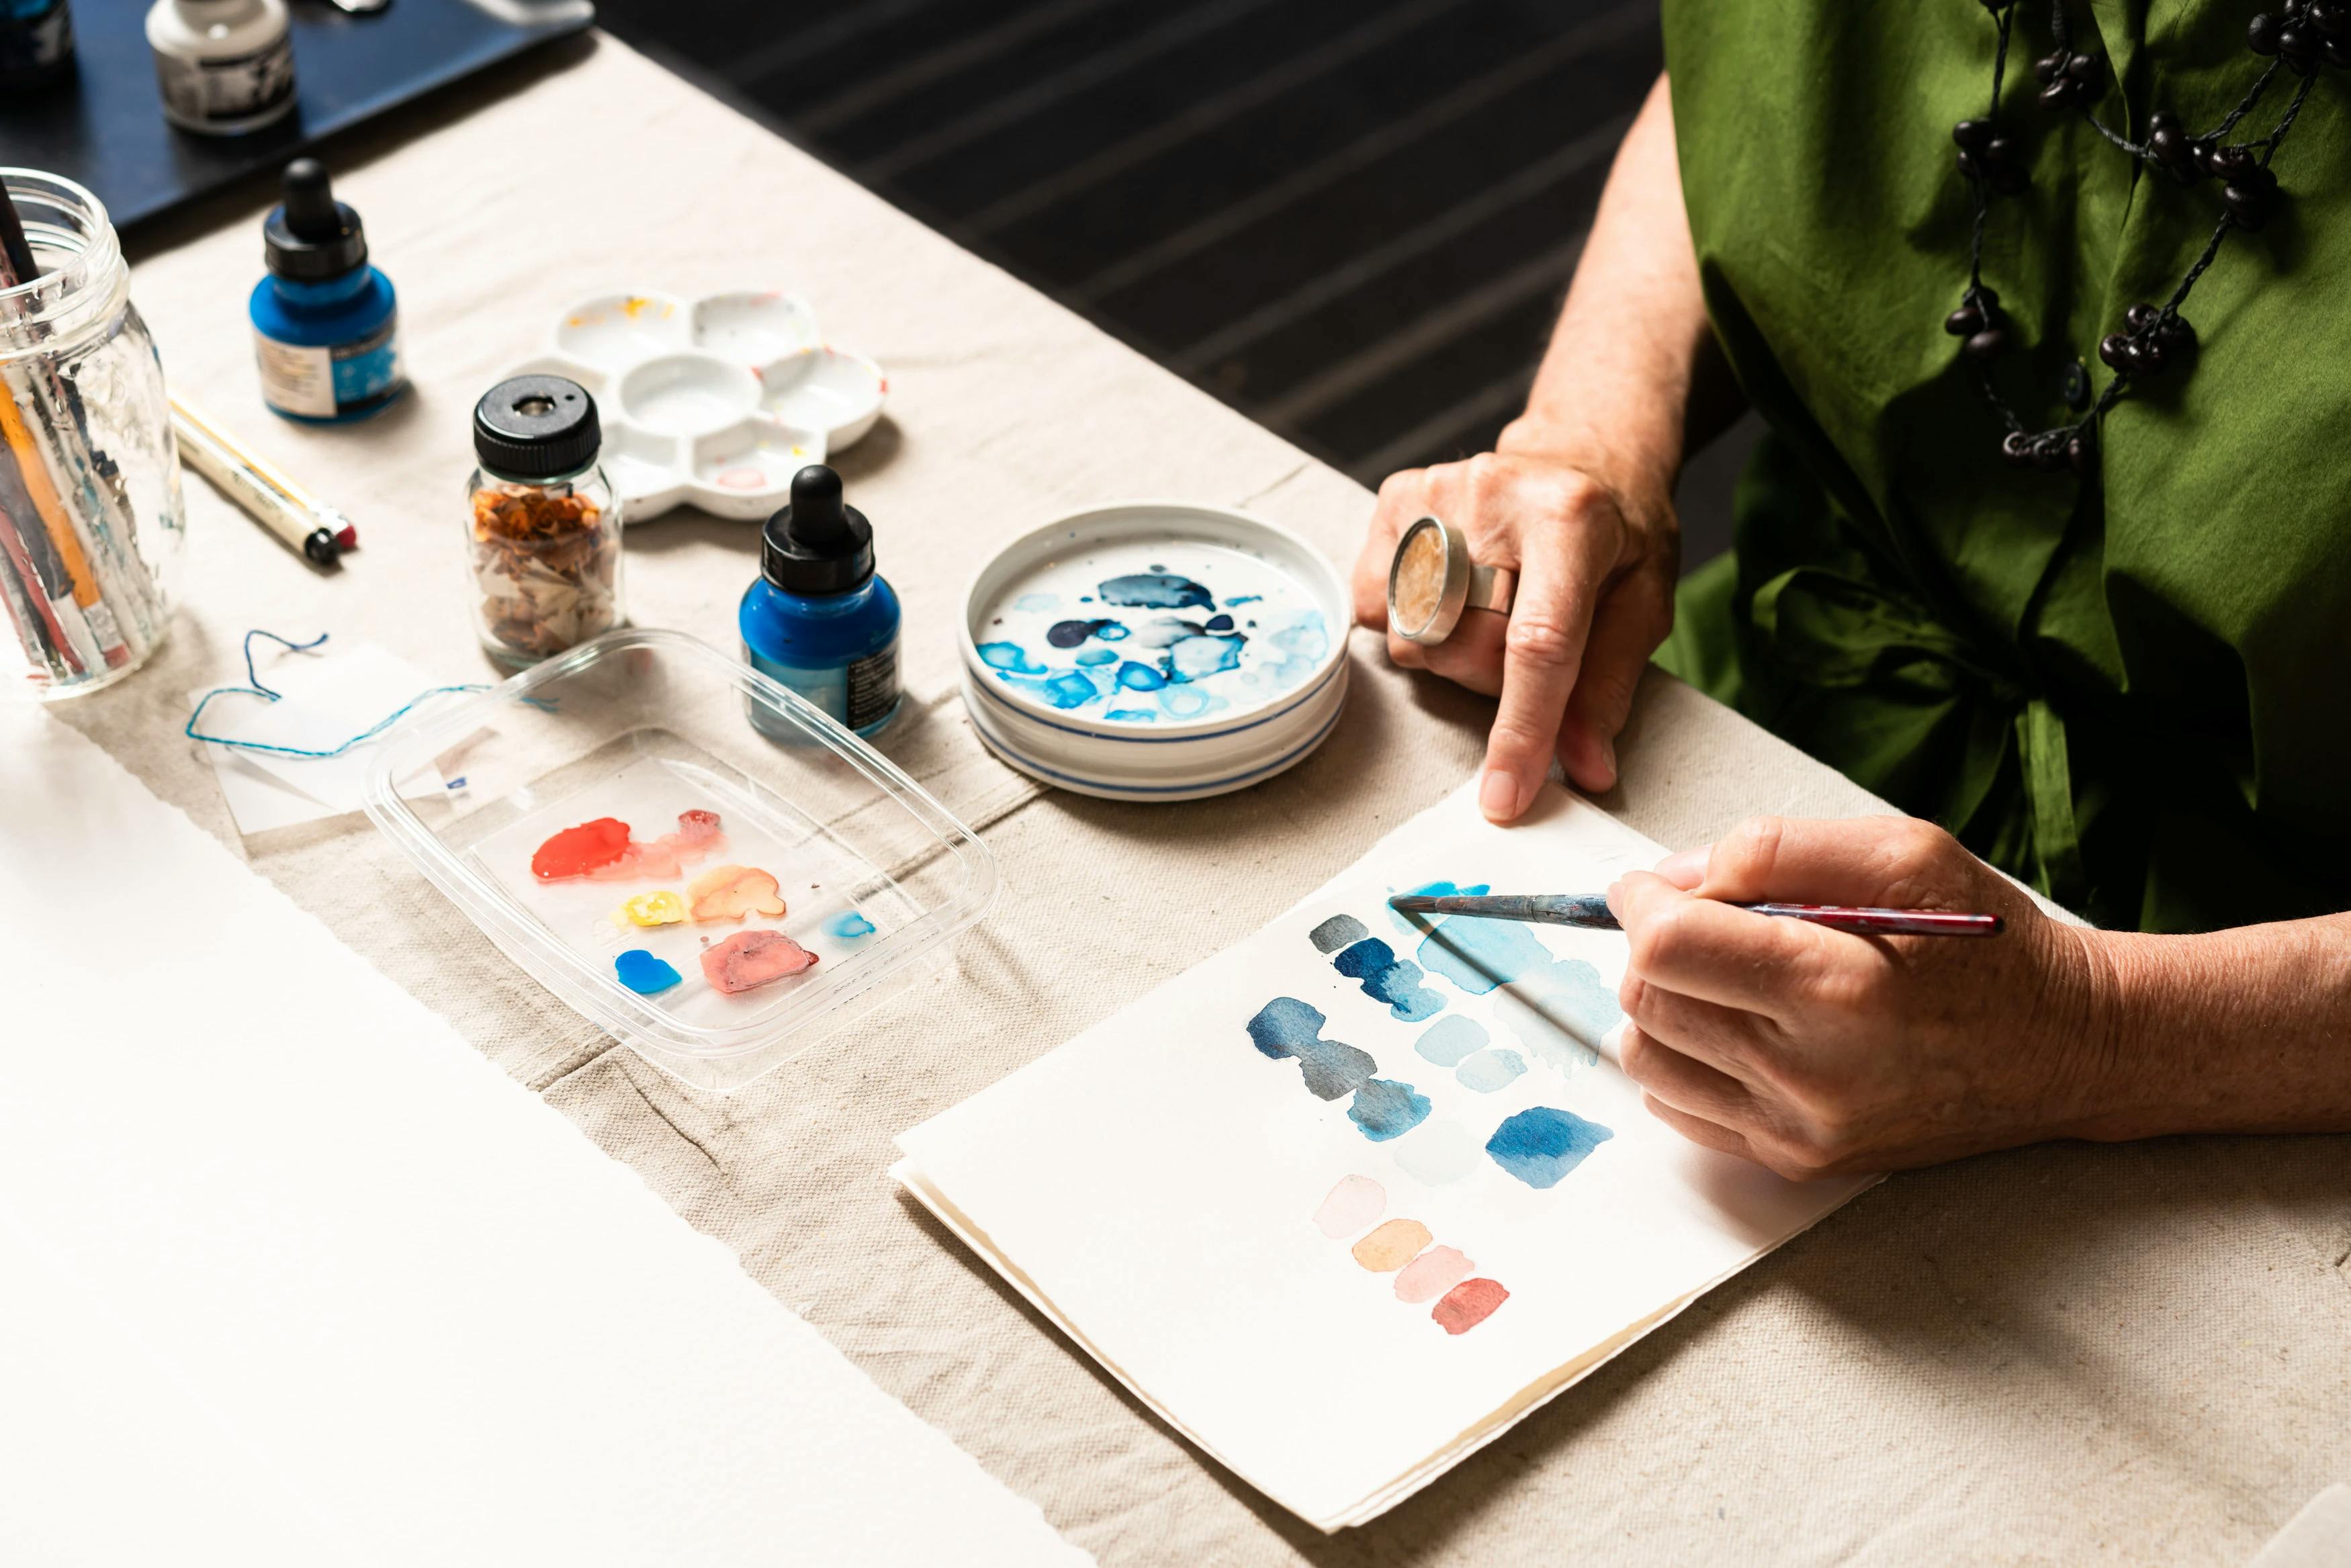 Artist Gail Tarantino using a small paintbrush to mix acrylic paints on paper.